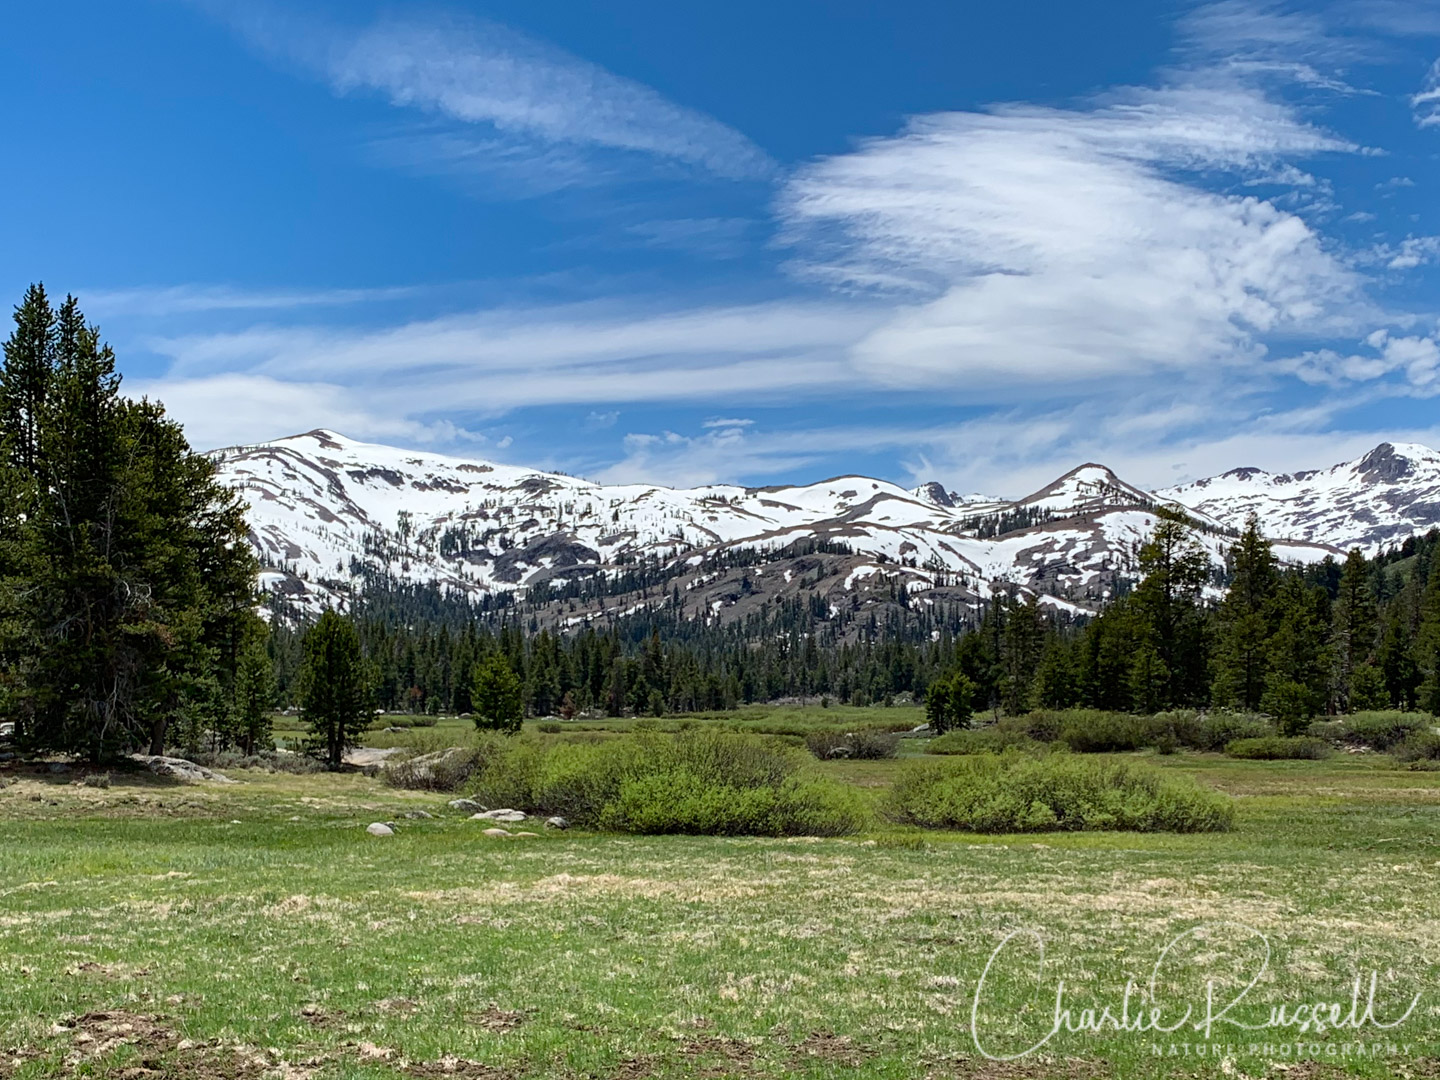 Snow-capped mountains around the meadow in Charity Valley